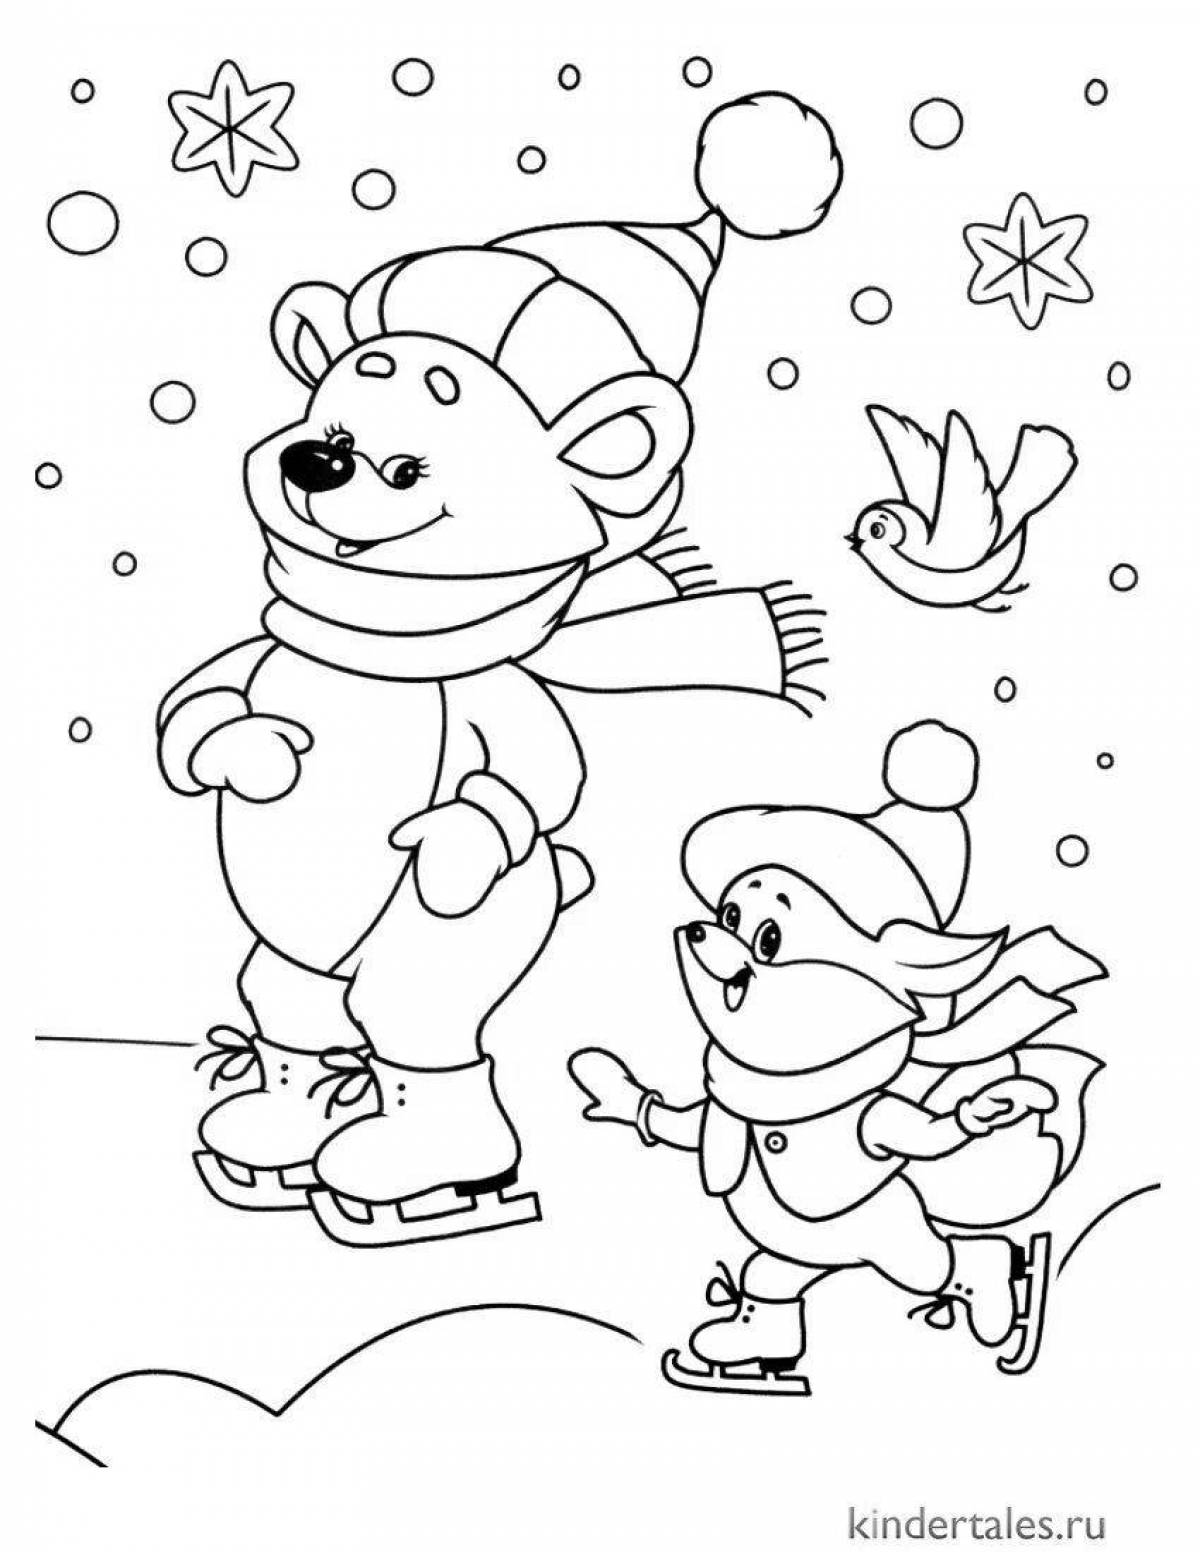 Adorable winter coloring book for kids